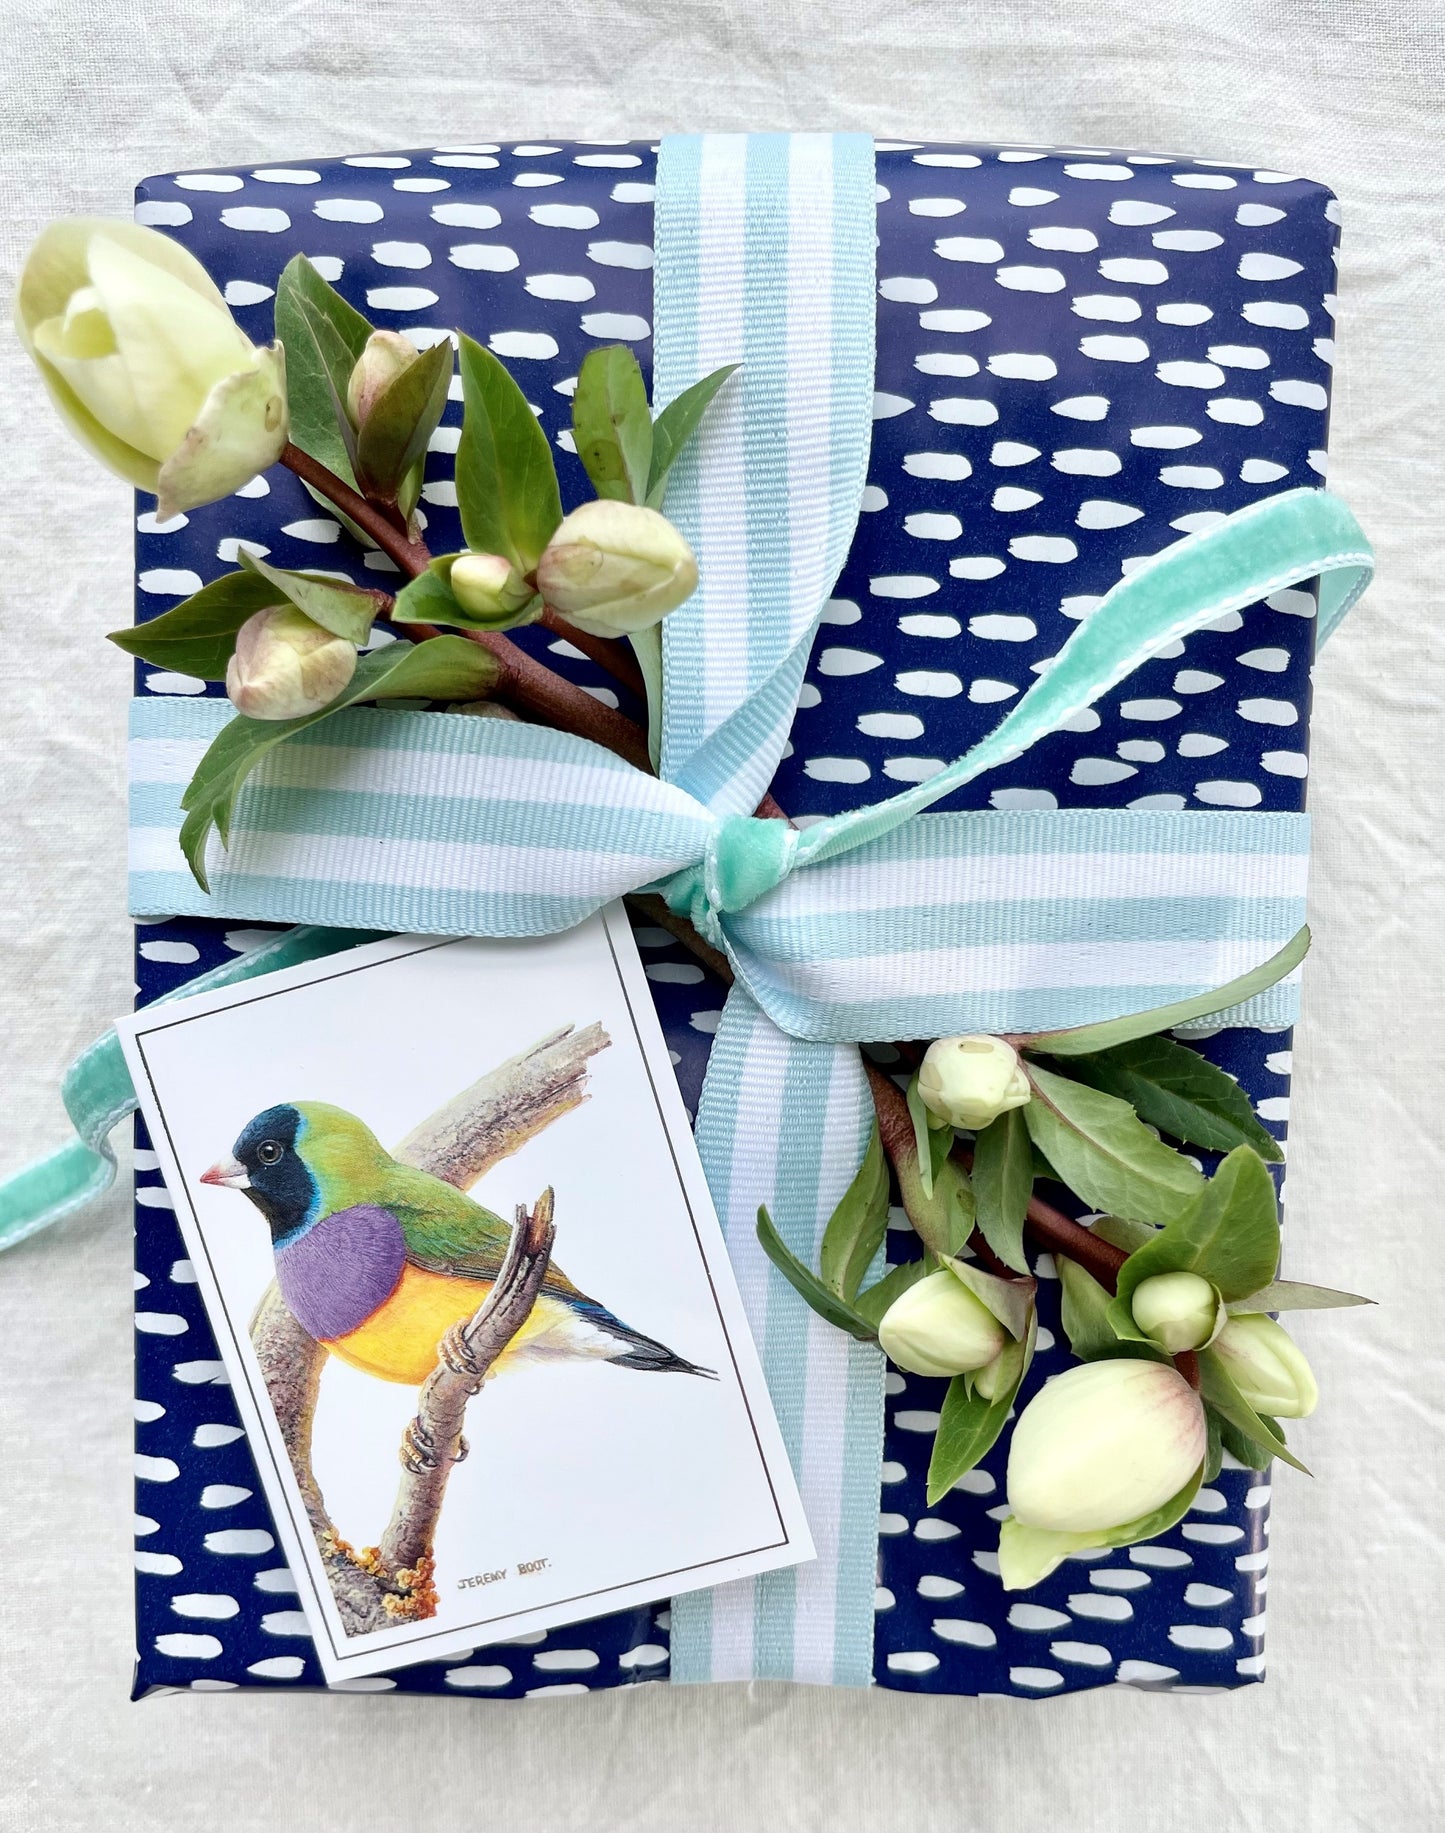 Gift Tag - Gouldian Finch